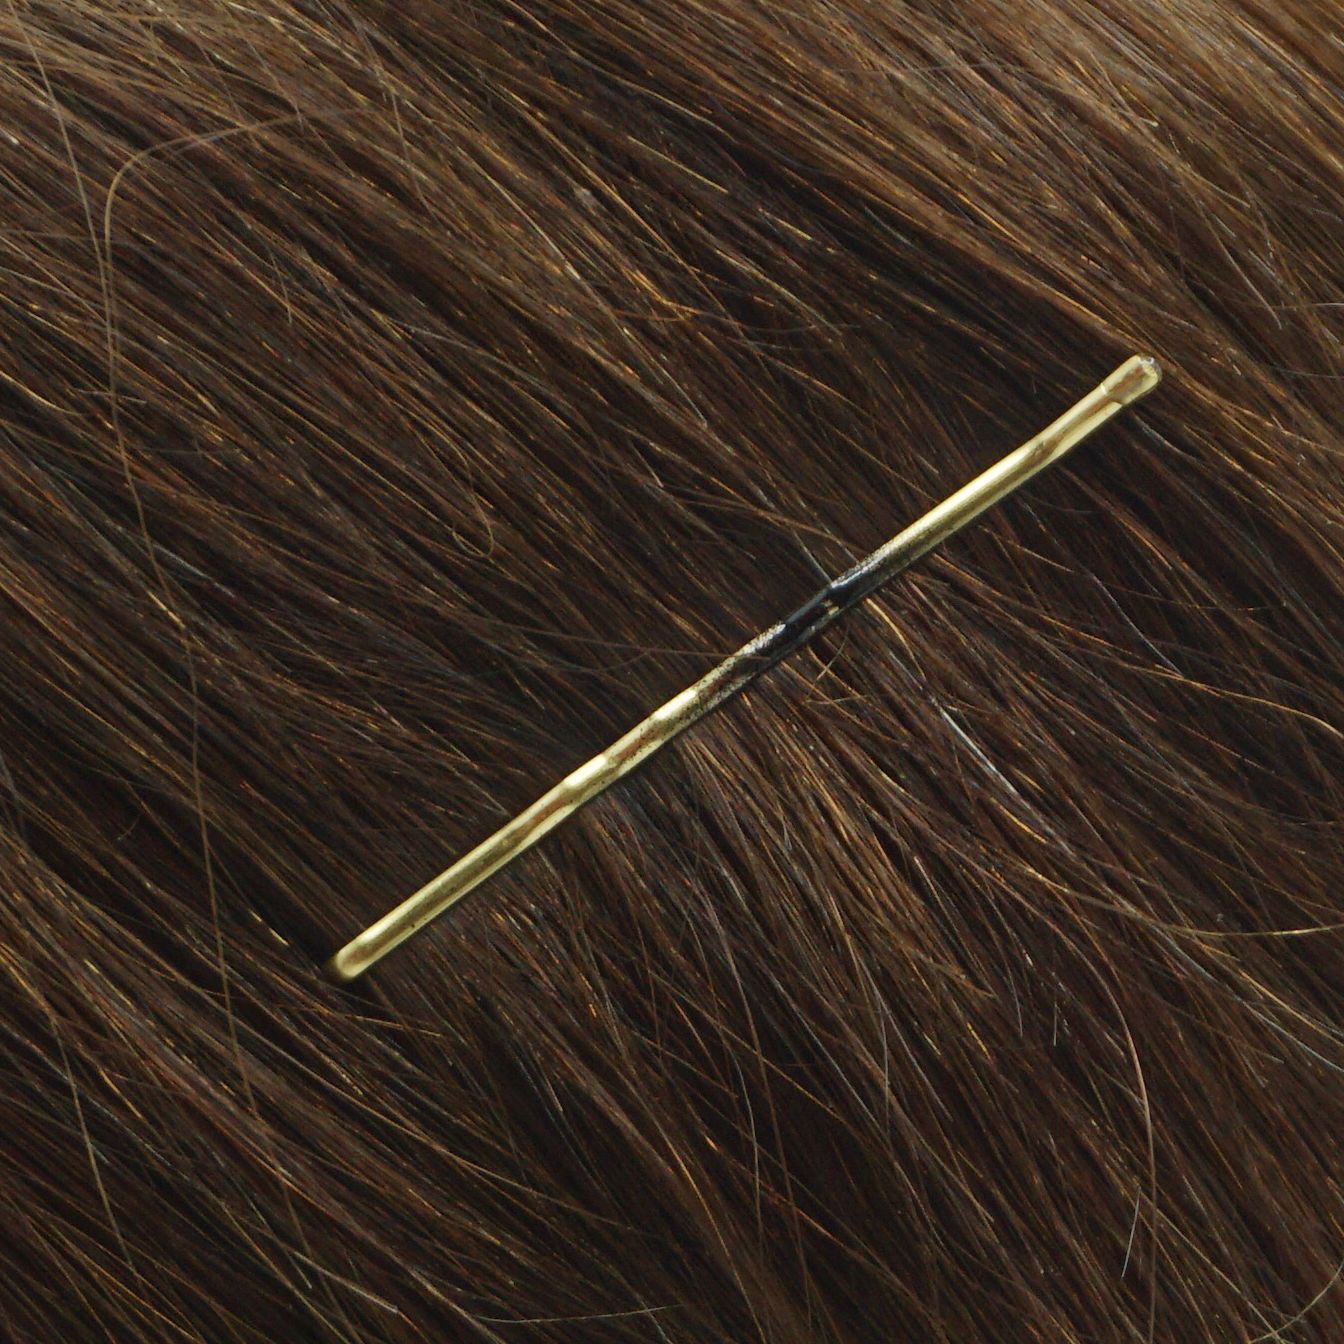 280, Tortoise Shell Color (Brassed/Black), 2.4in (6.0cm), Italian Made Flat Bobby Pins, Recloseable Stay Clean and Organized Container